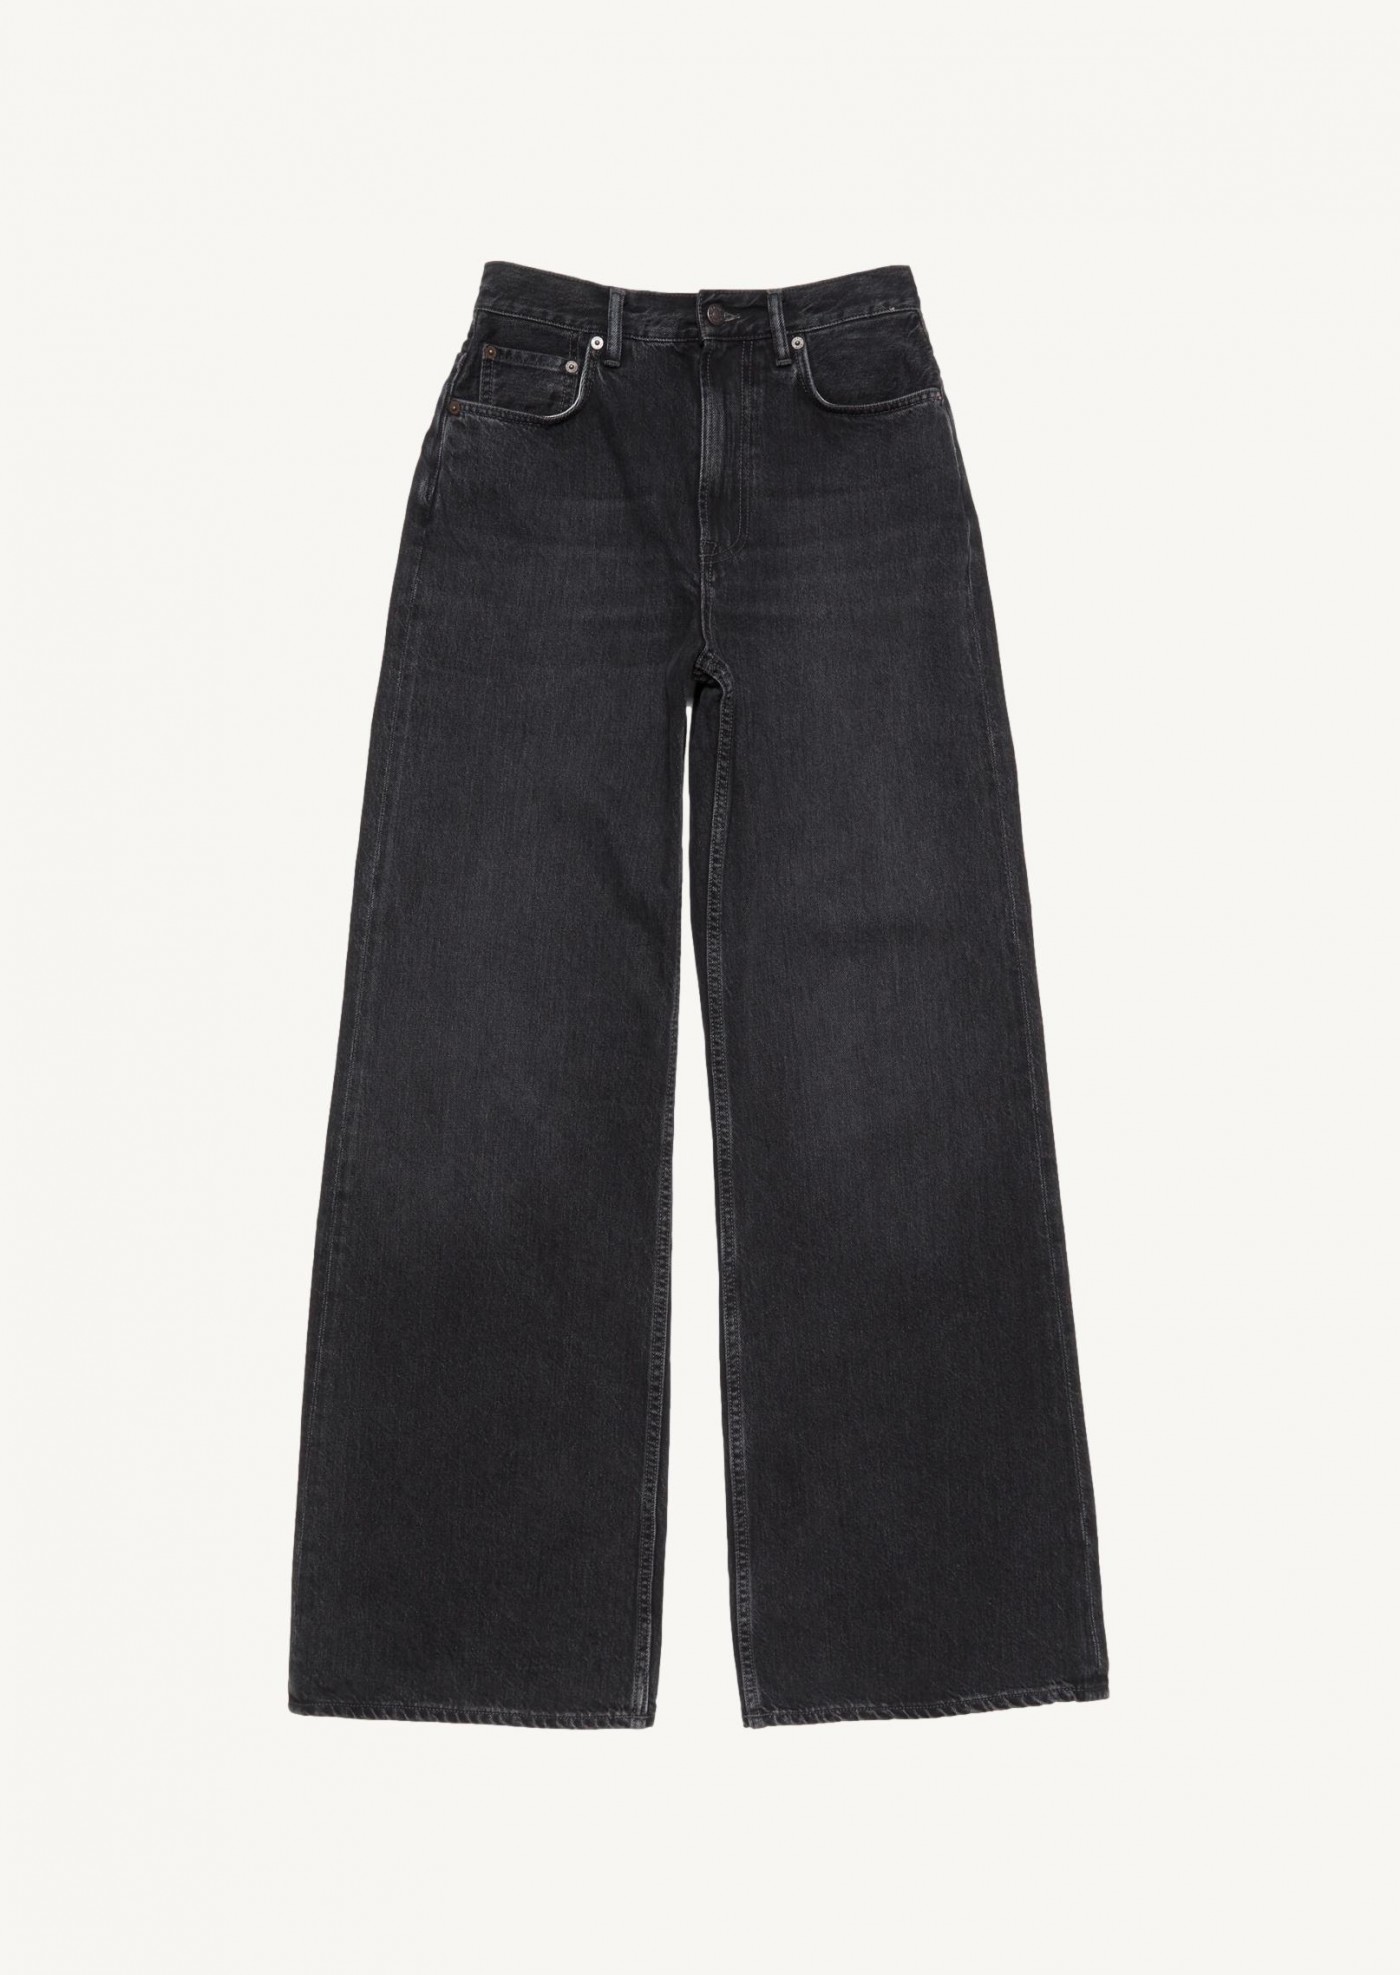 Relaxed fit jeans - Acne Studios